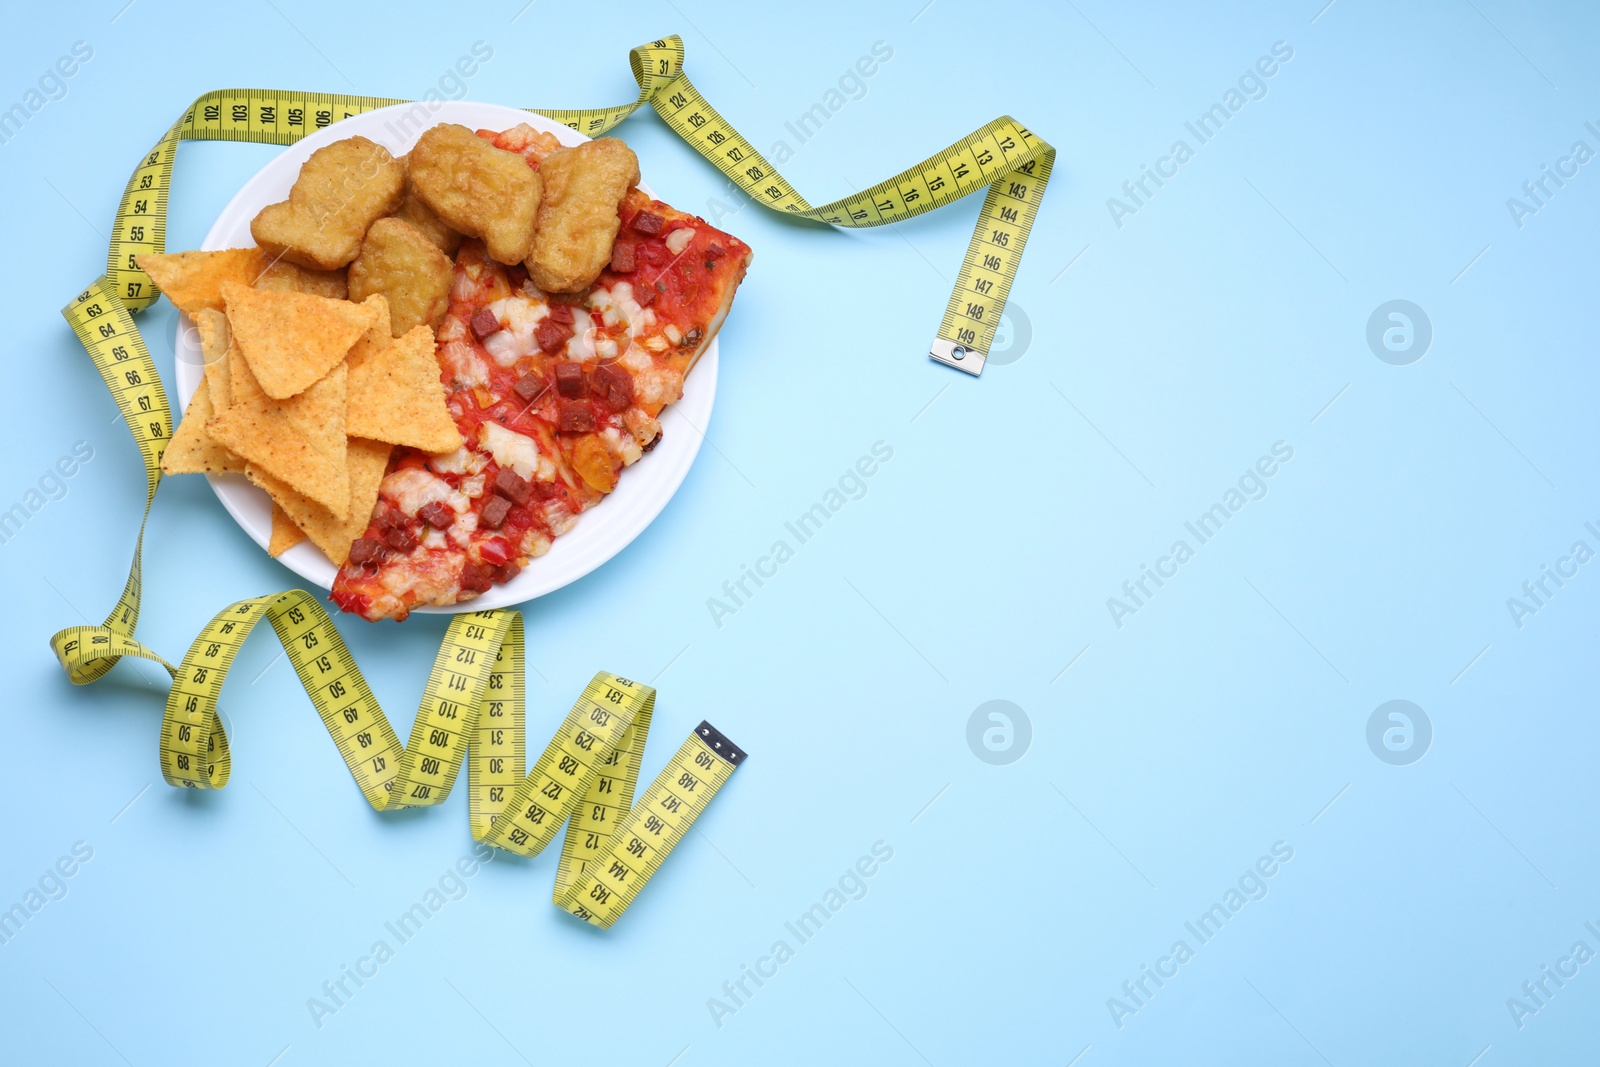 Photo of Chips, chicken nuggets, pizza and measuring tape on light blue background, flat lay and space for text. Diet concept